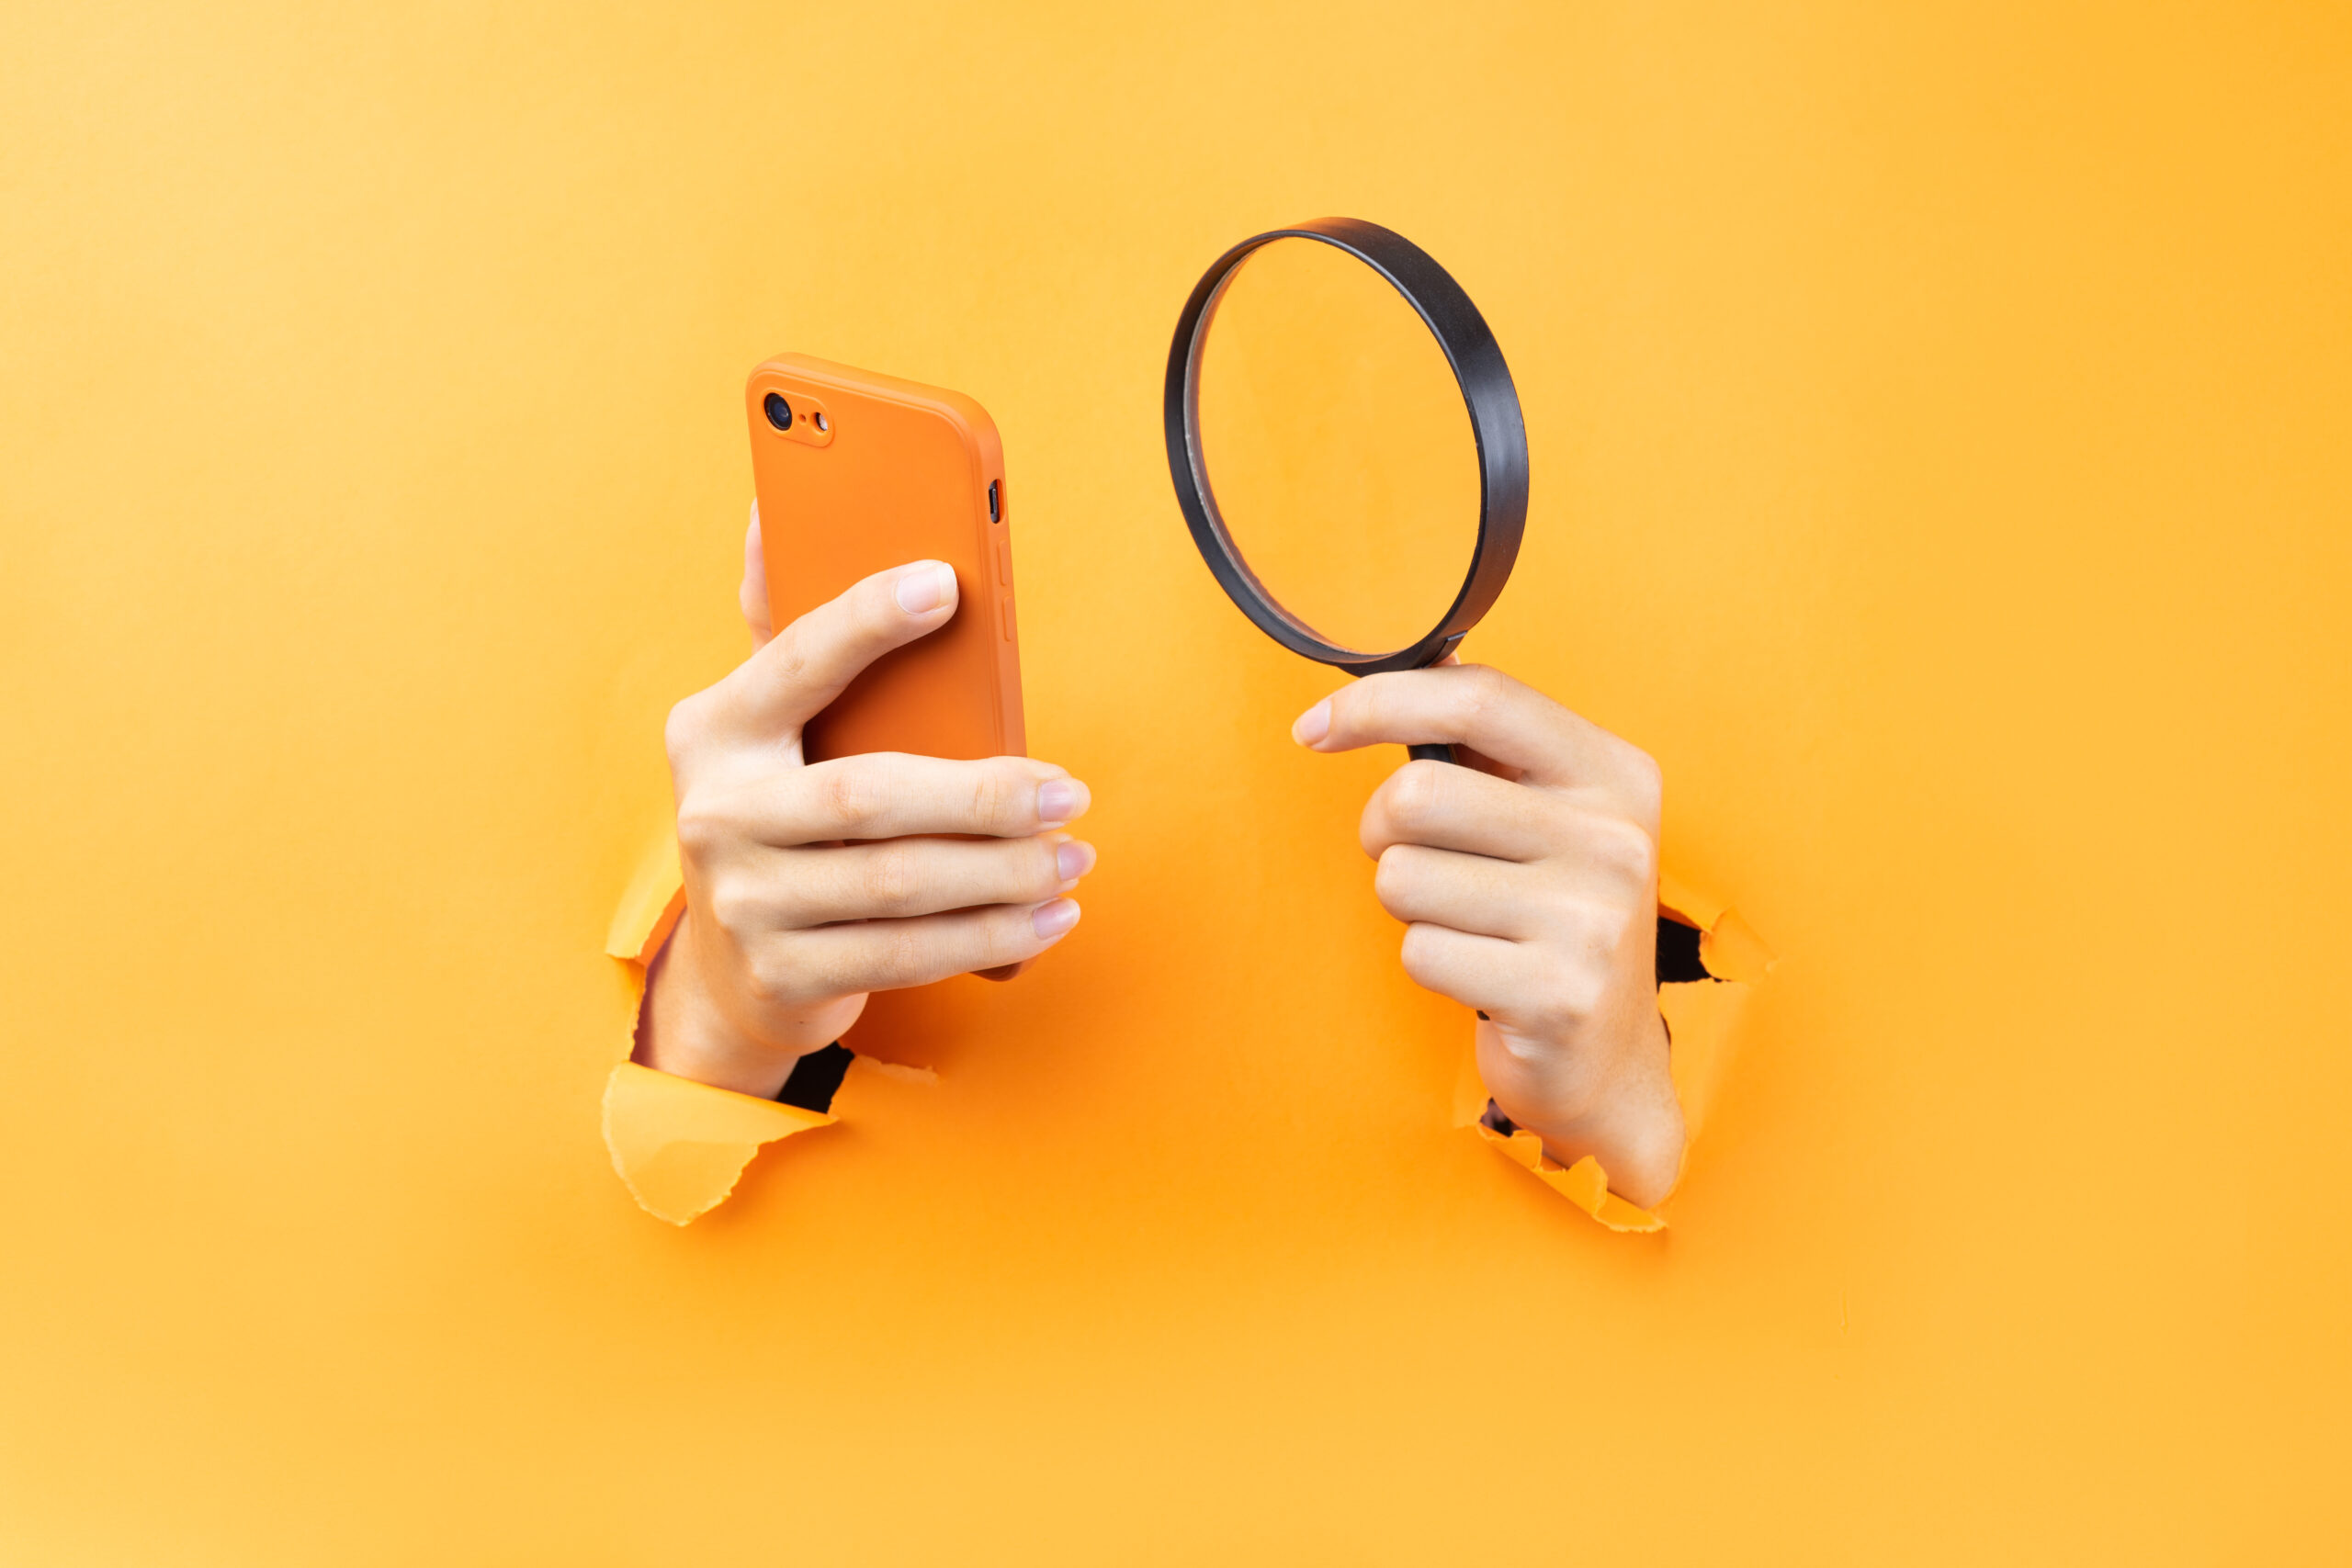 vecteezy hand holding magnifying glass and phone protruding from background 2871065 scaled